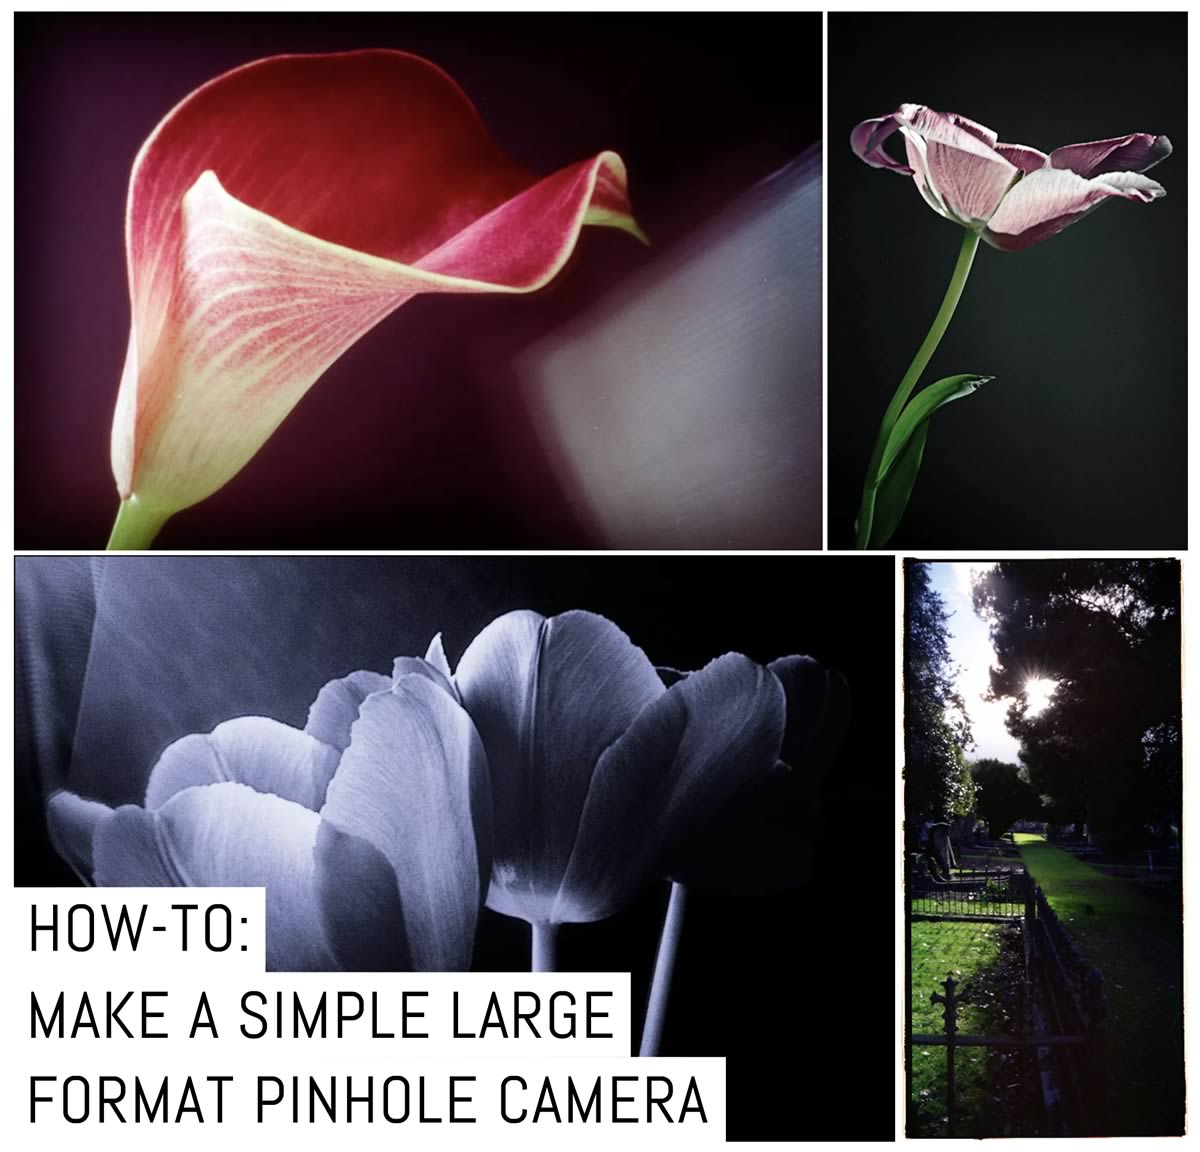 How to: Make a simple large format pinhole camera